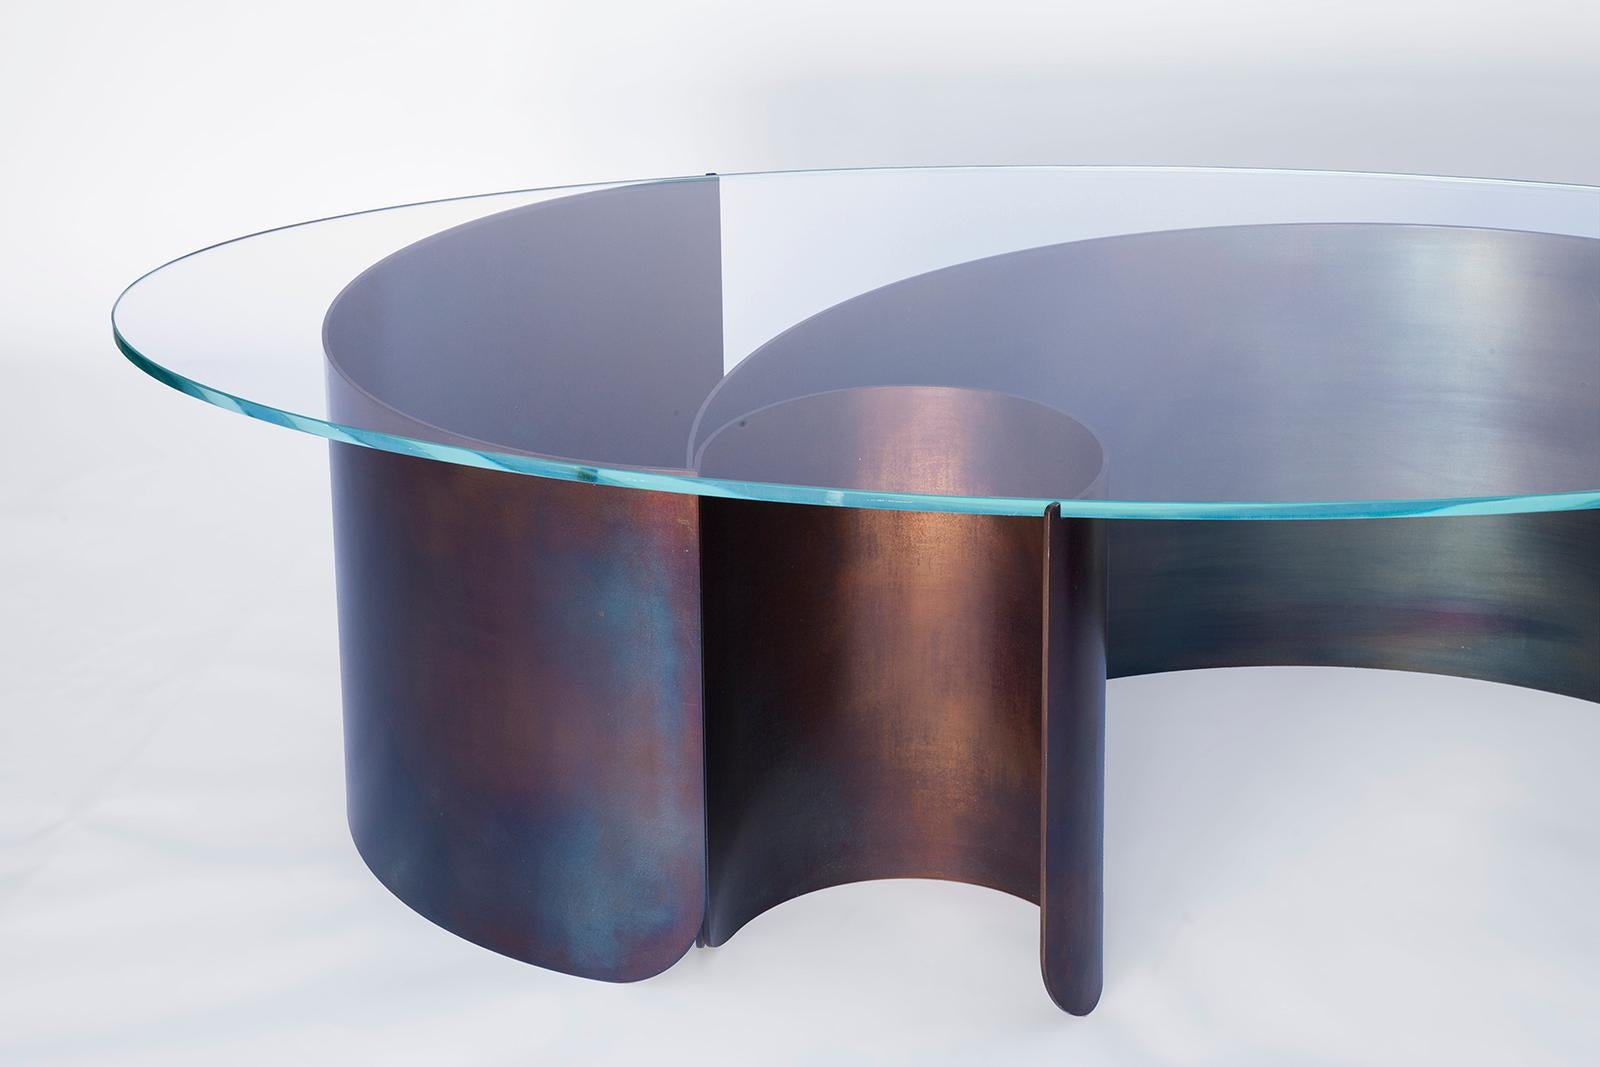 Rolled sheets of steel curl and peel away beneath a transparent oval glass surface, capturing the dynamic moment of a cresting wave. The vibrant multicolored steel surface is created through a unique heat treatment process through which molecules